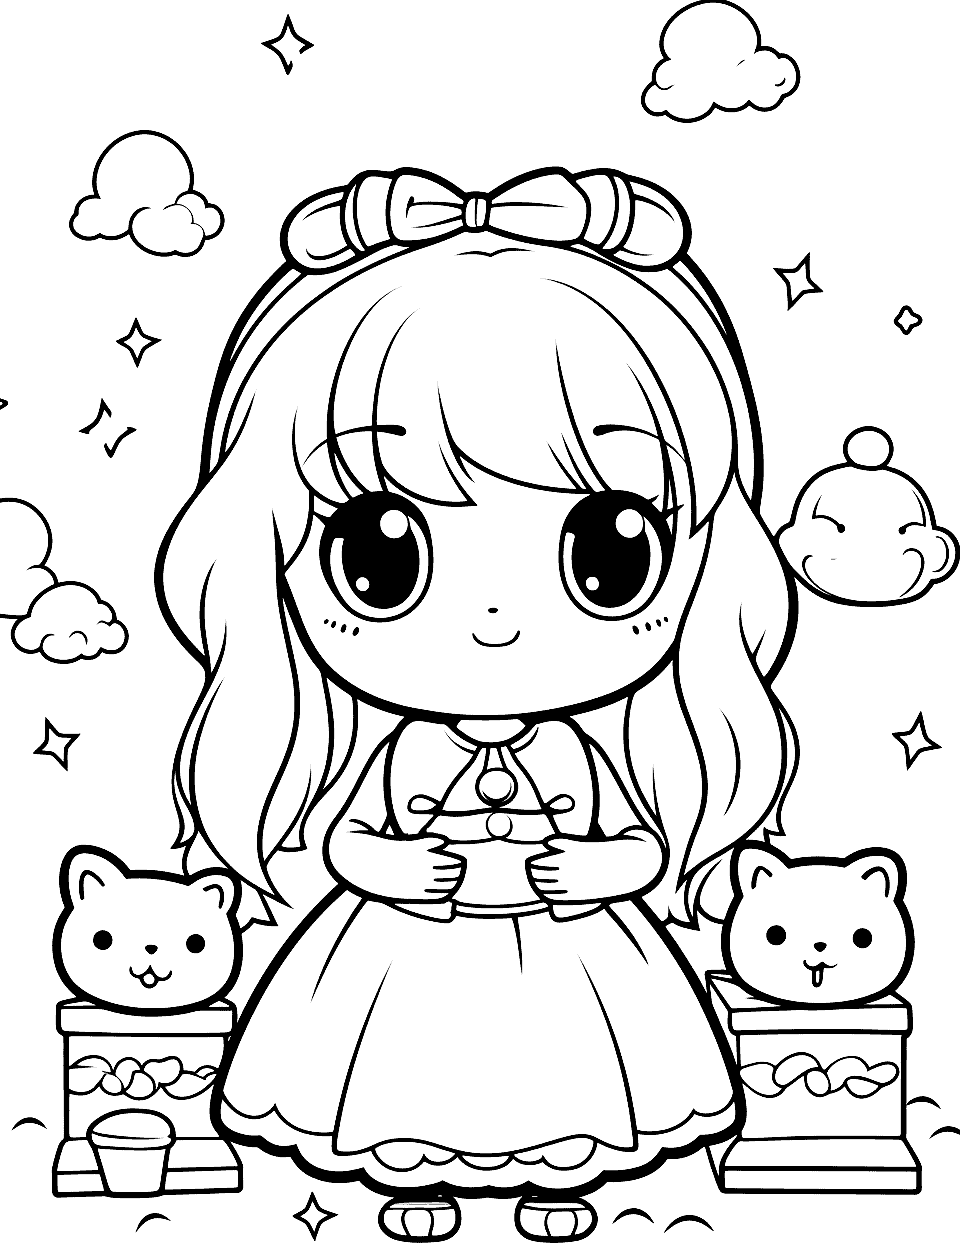 Anime Princess in Kawaii style Coloring Page - A beautiful anime princess in a Kawaii-style.